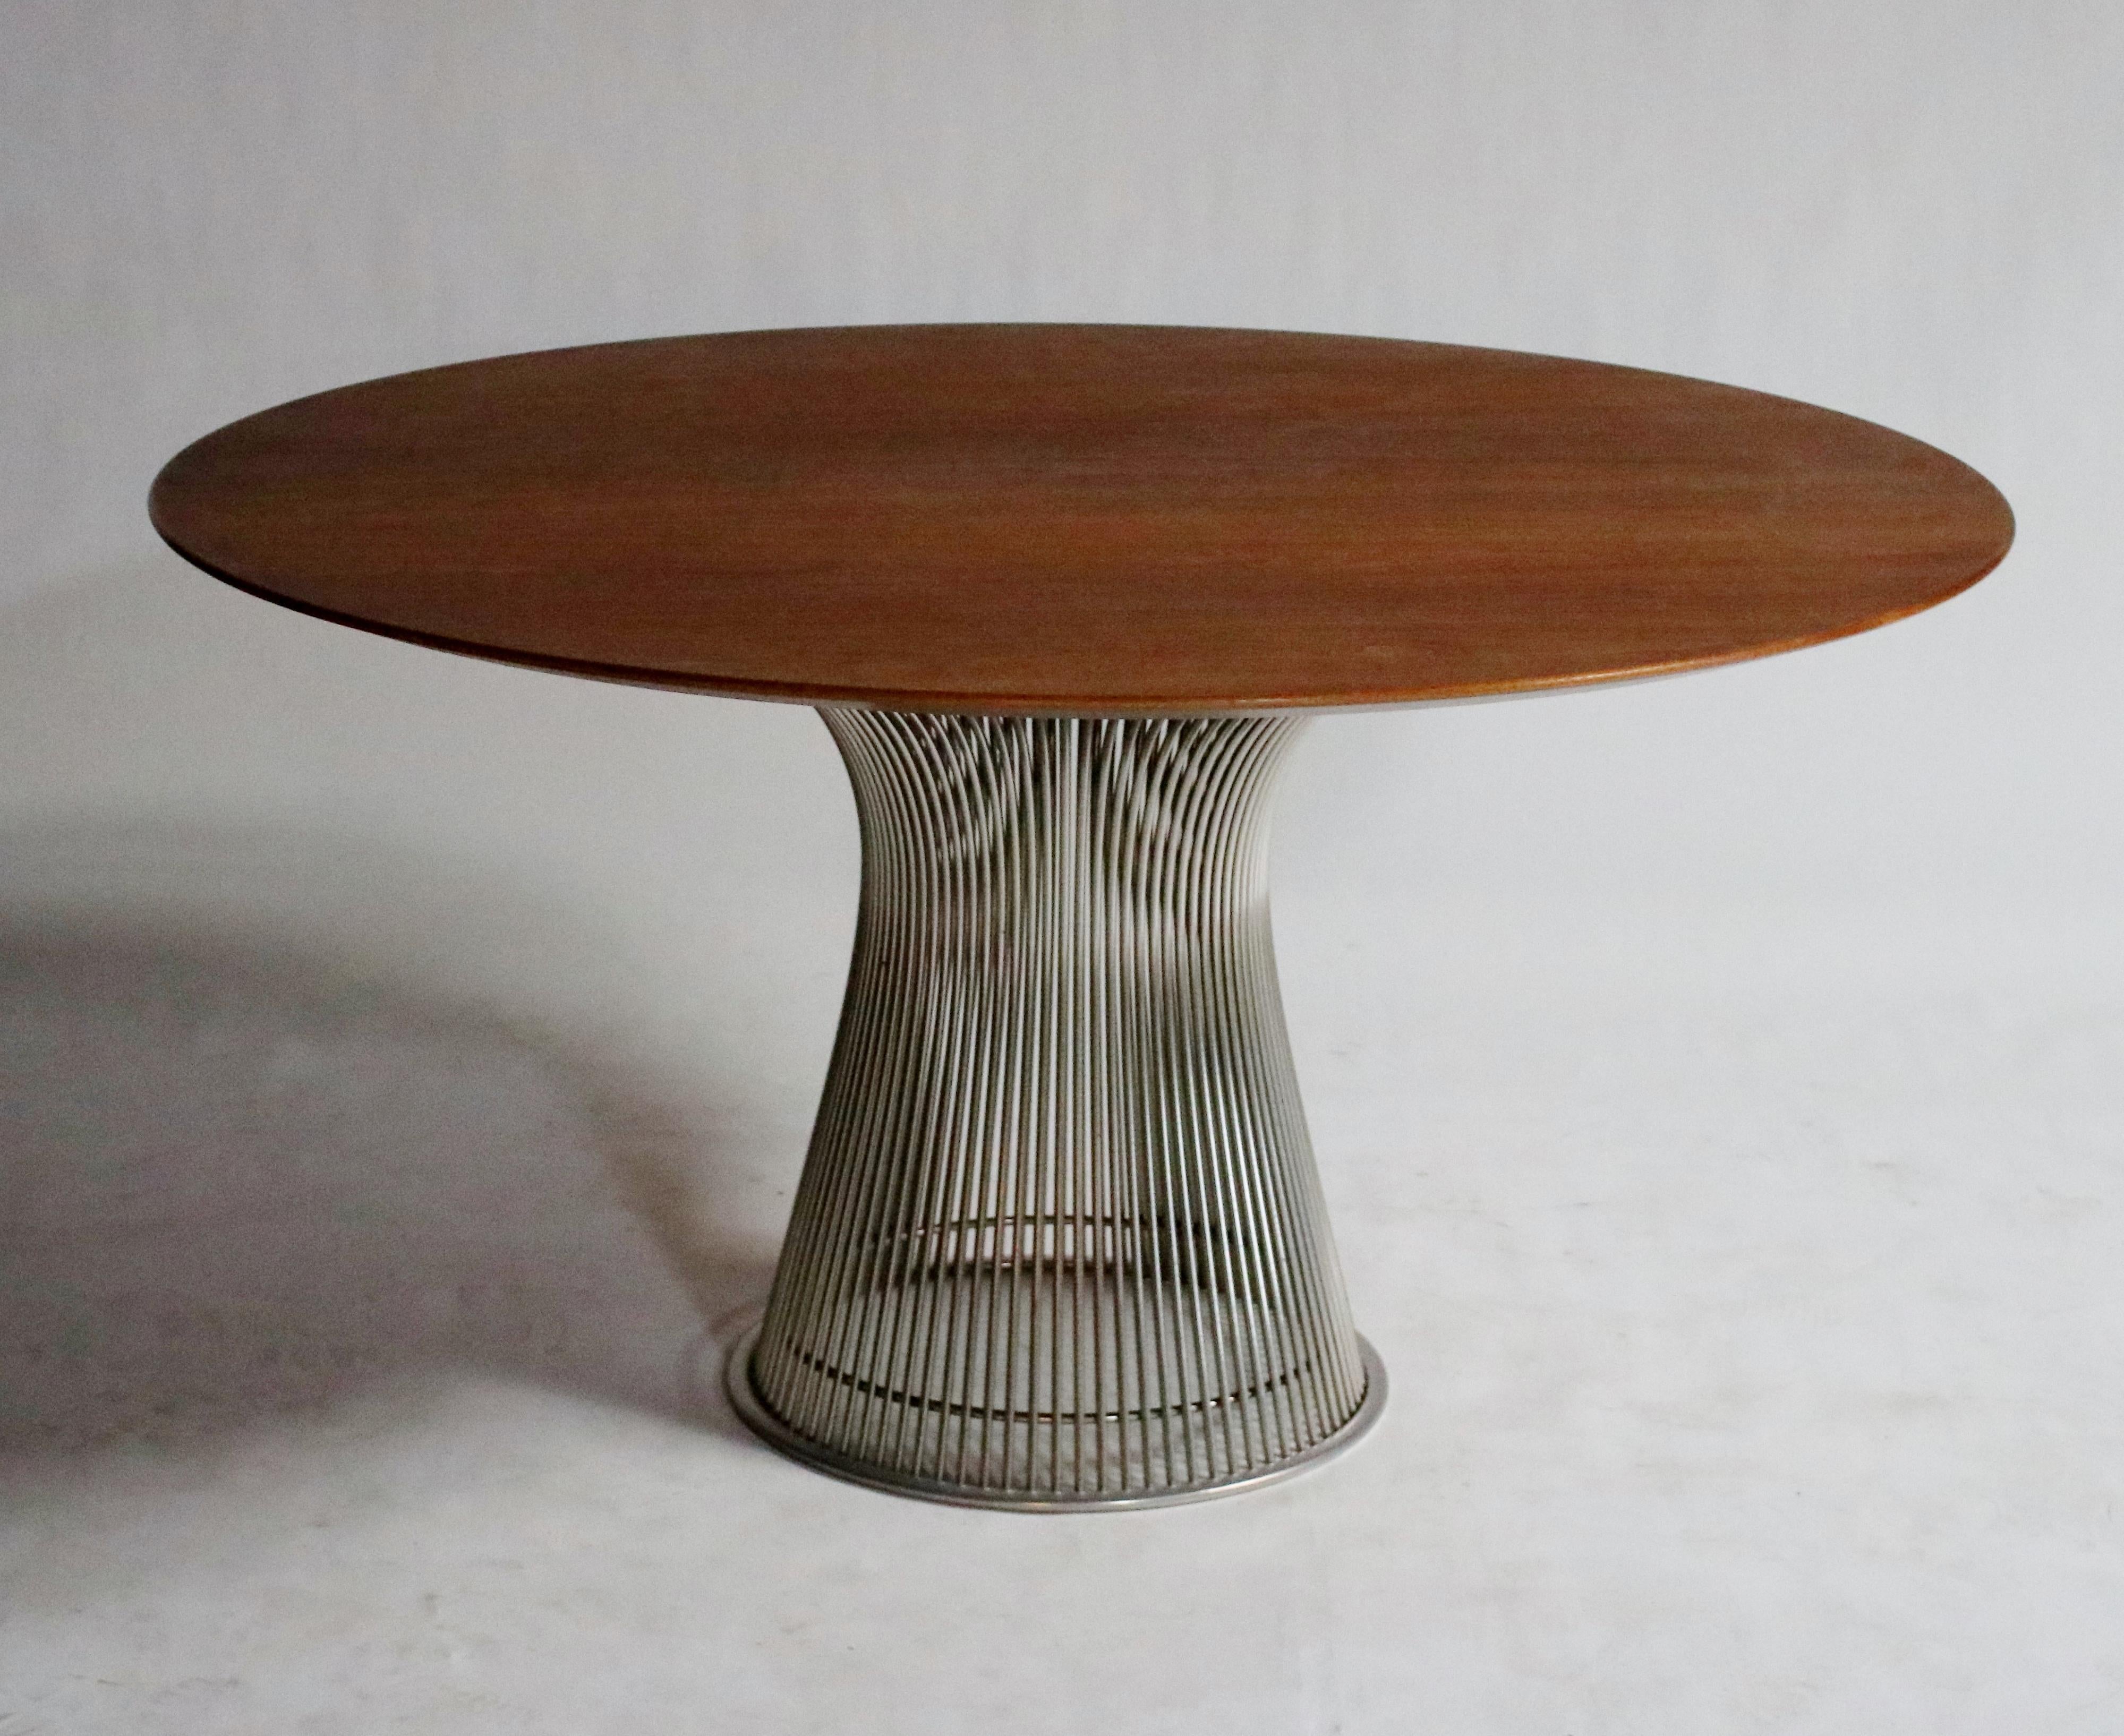 1970s Knoll dining table by Warren Platner with walnut wood top. Choose your size of walnut top 48